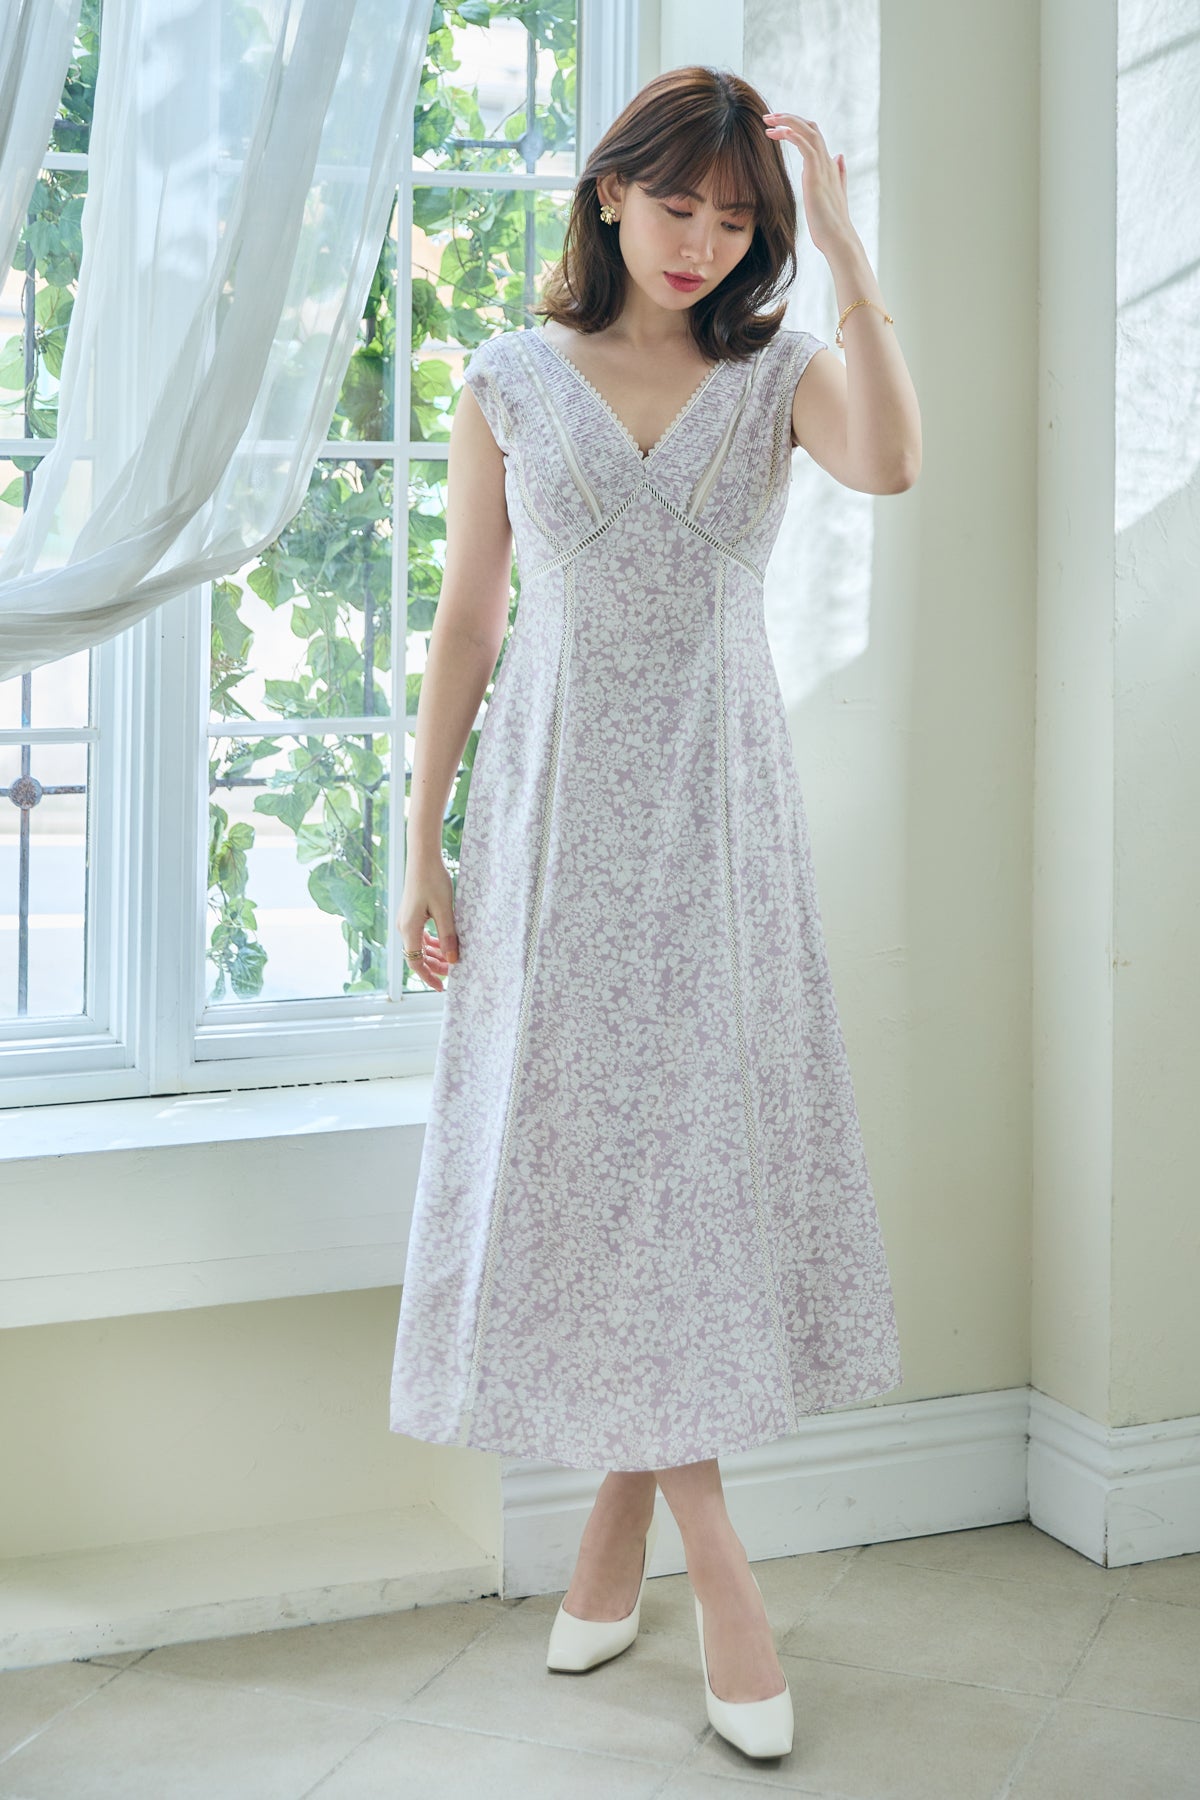 herlipto Lace Trimmed Floral Dress フローラル - ロングワンピース